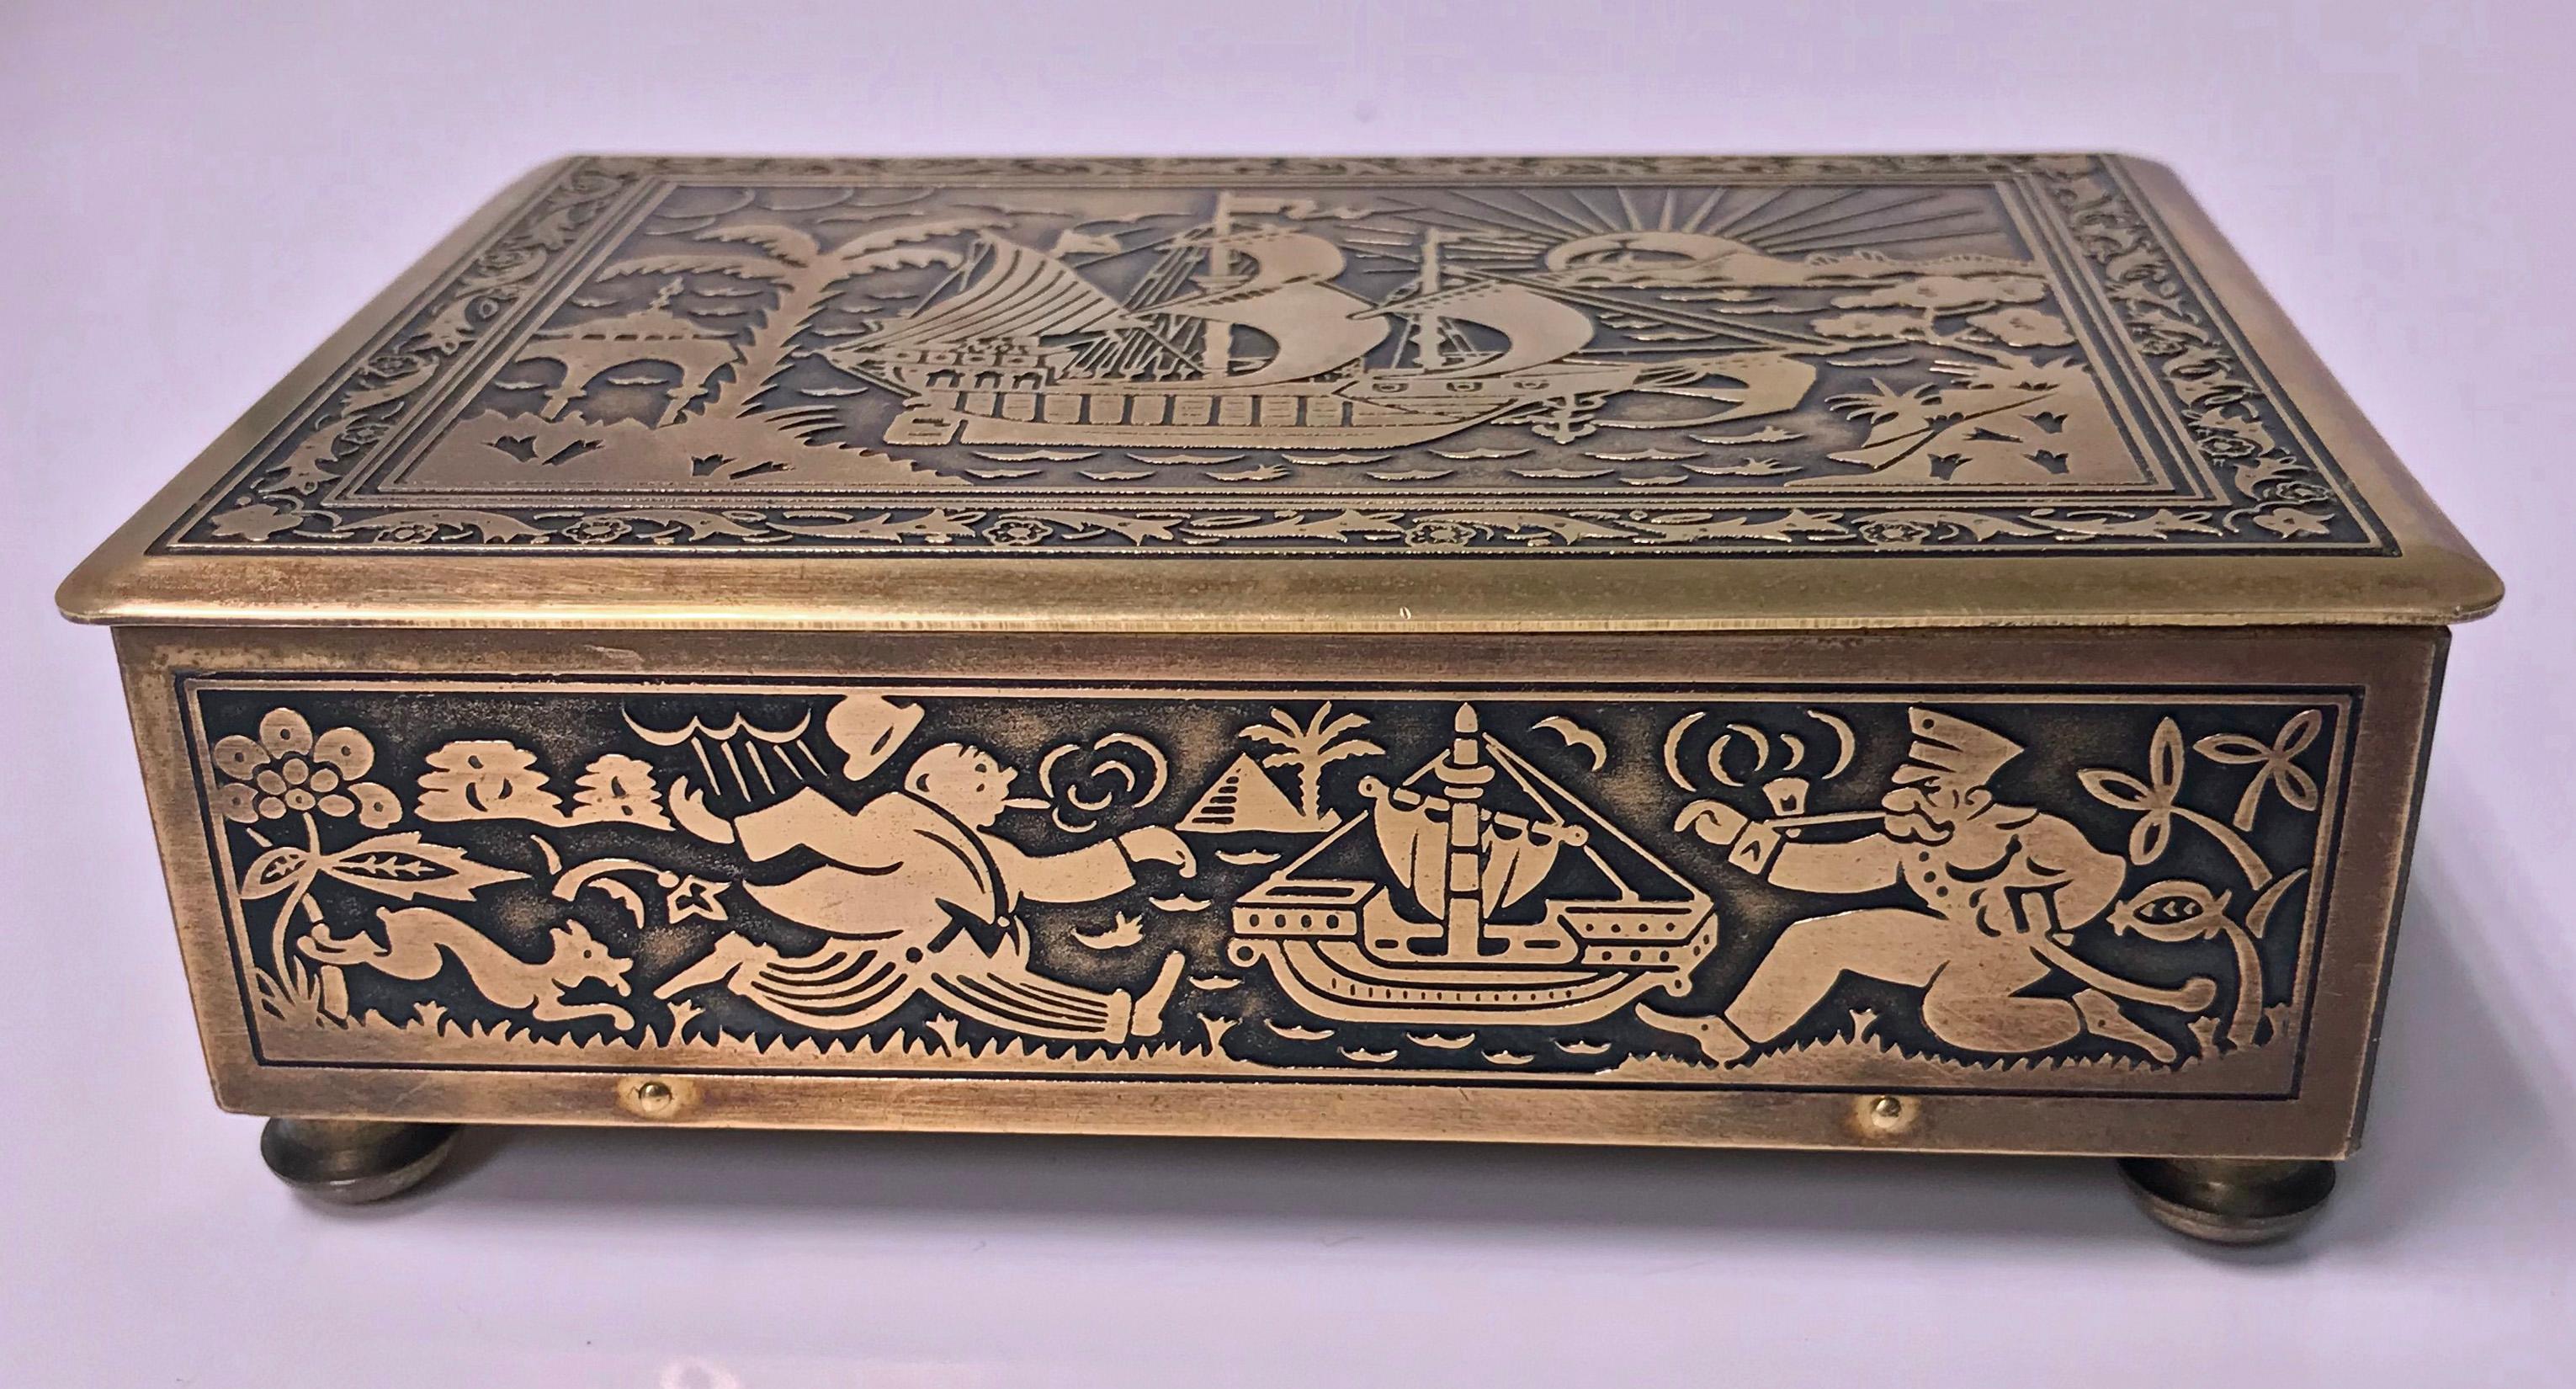 Art Deco brass Jewelry box, Germany, circa 1920 possibly by Erhard & Söhne of Schwäbisch Gmünd. The box of rectangular shape on brass bun feet, the brass body and cover oxidized inlay decorated with various scenes of running figures, animals, sunset